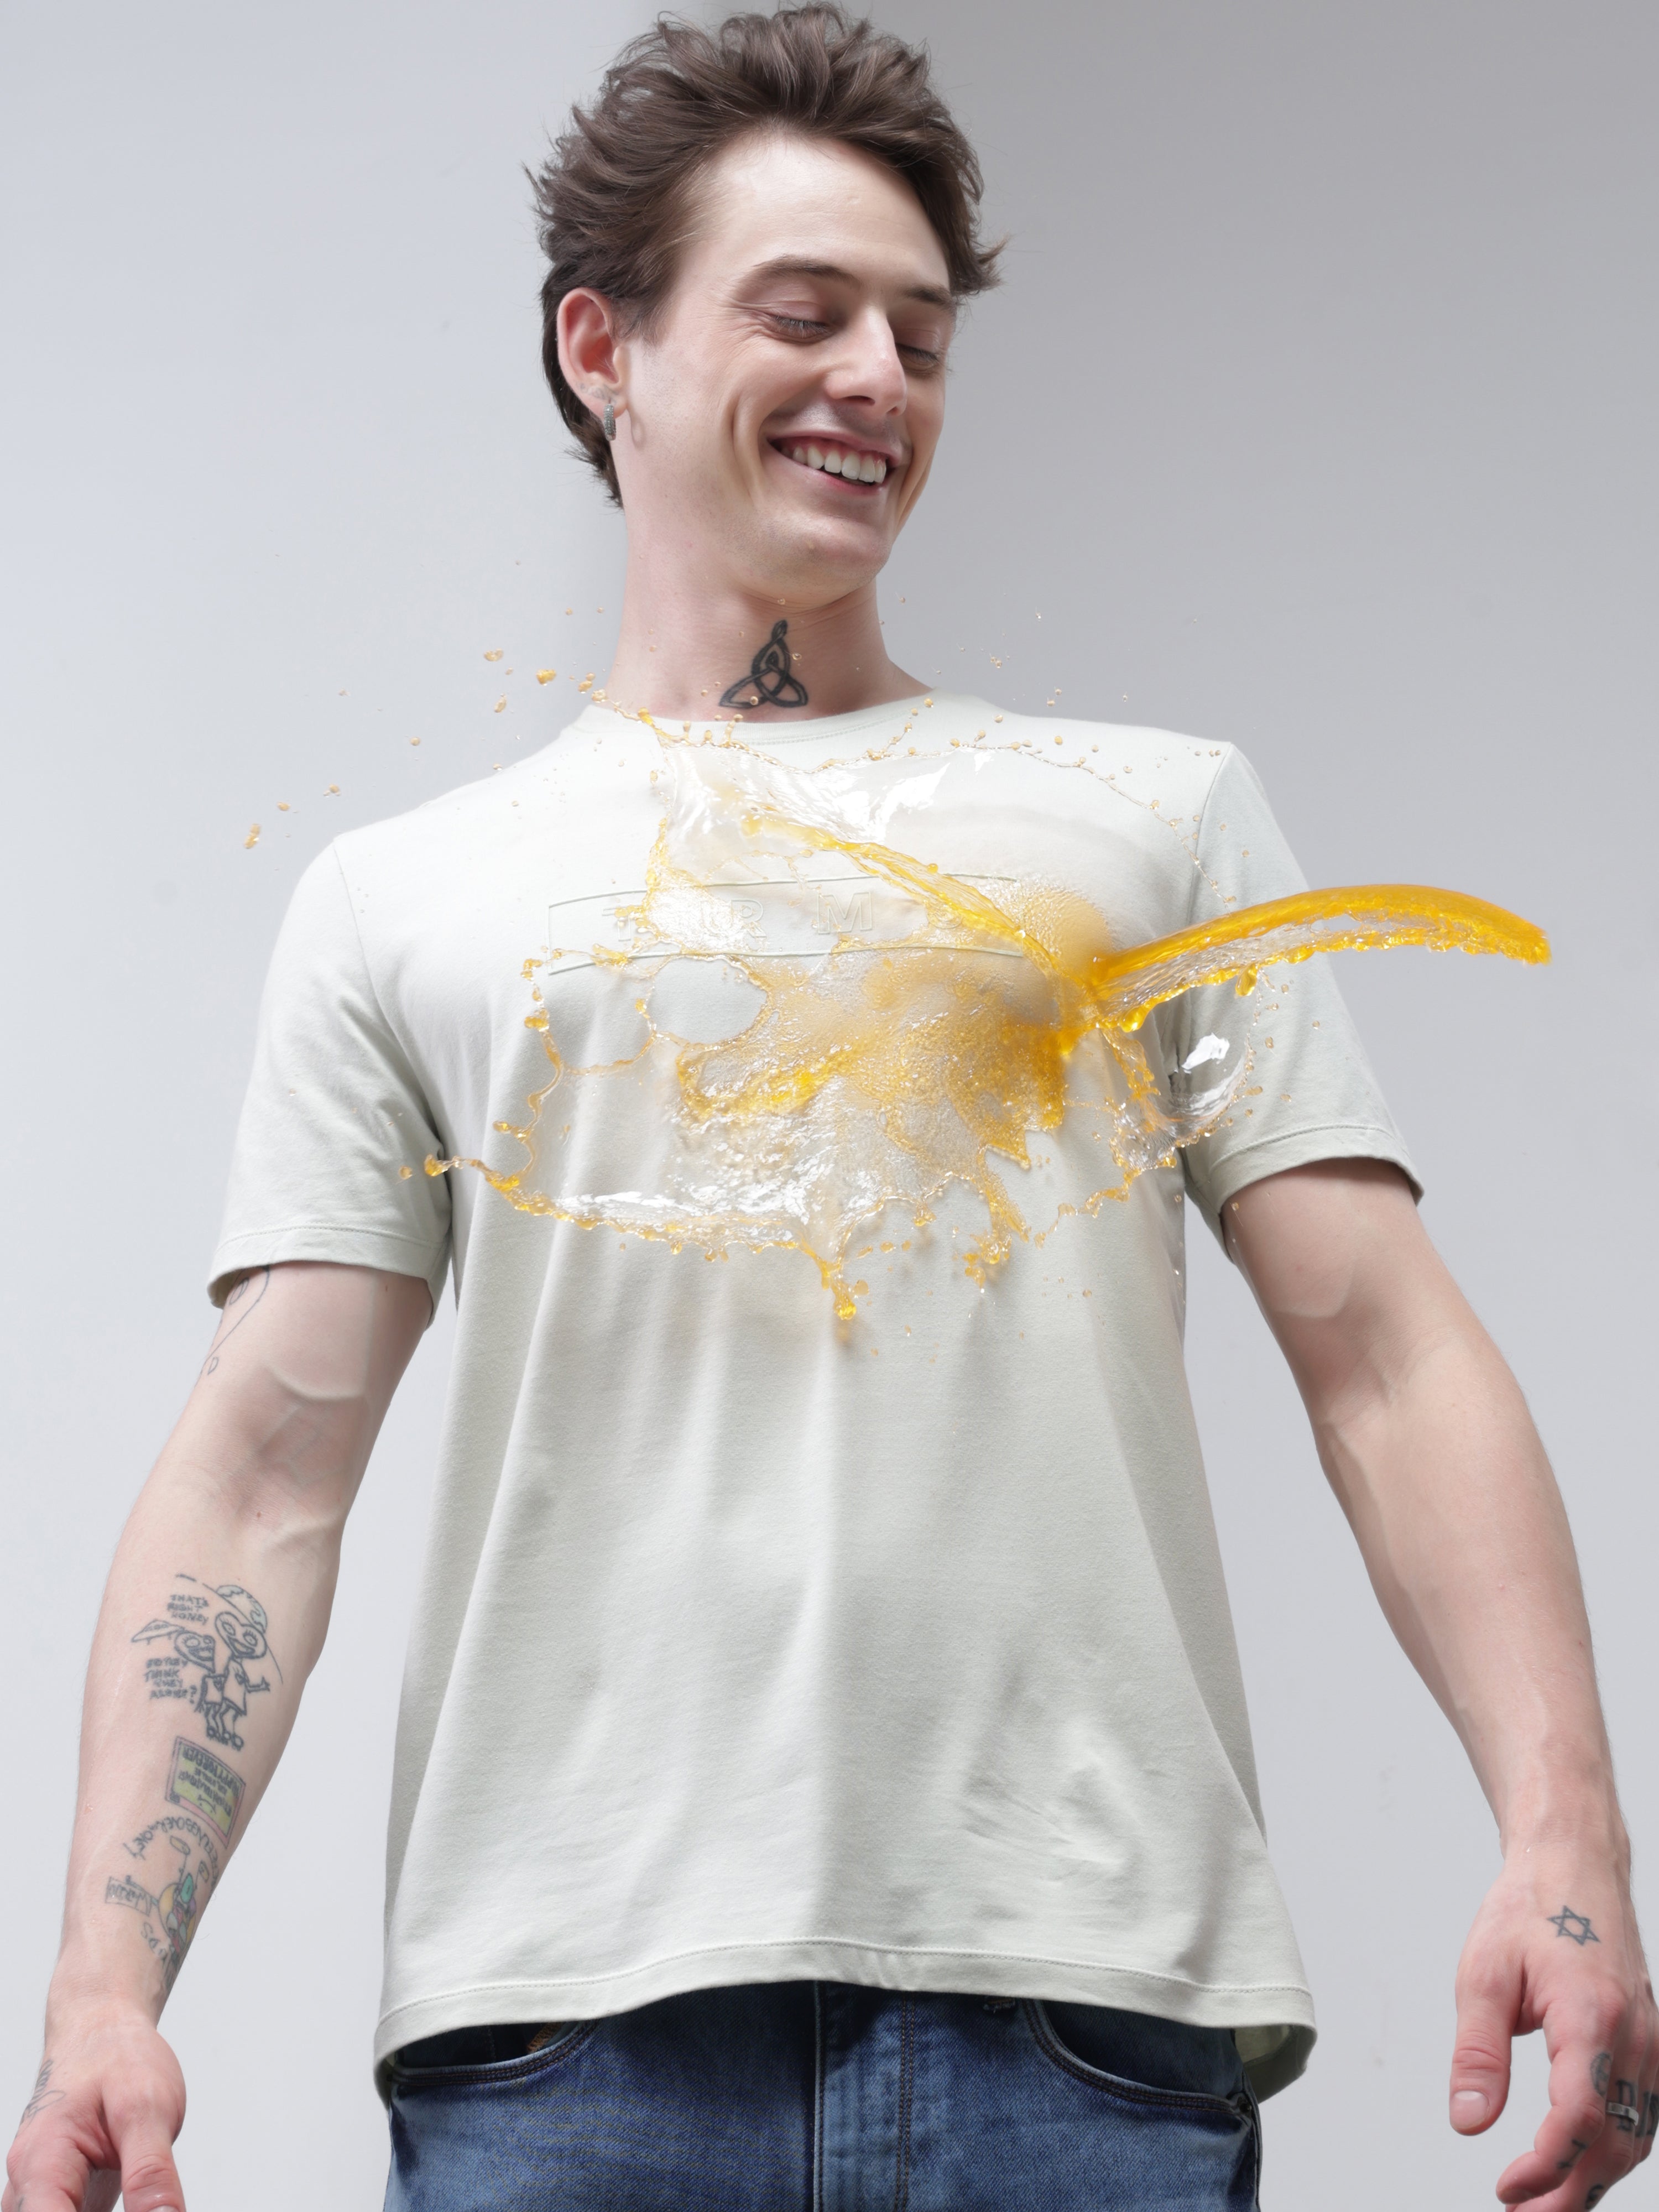 Man smiling as liquid spills onto his stain-proof Turms T-shirt, showcasing its anti-stain, anti-odor, and stretchable properties.